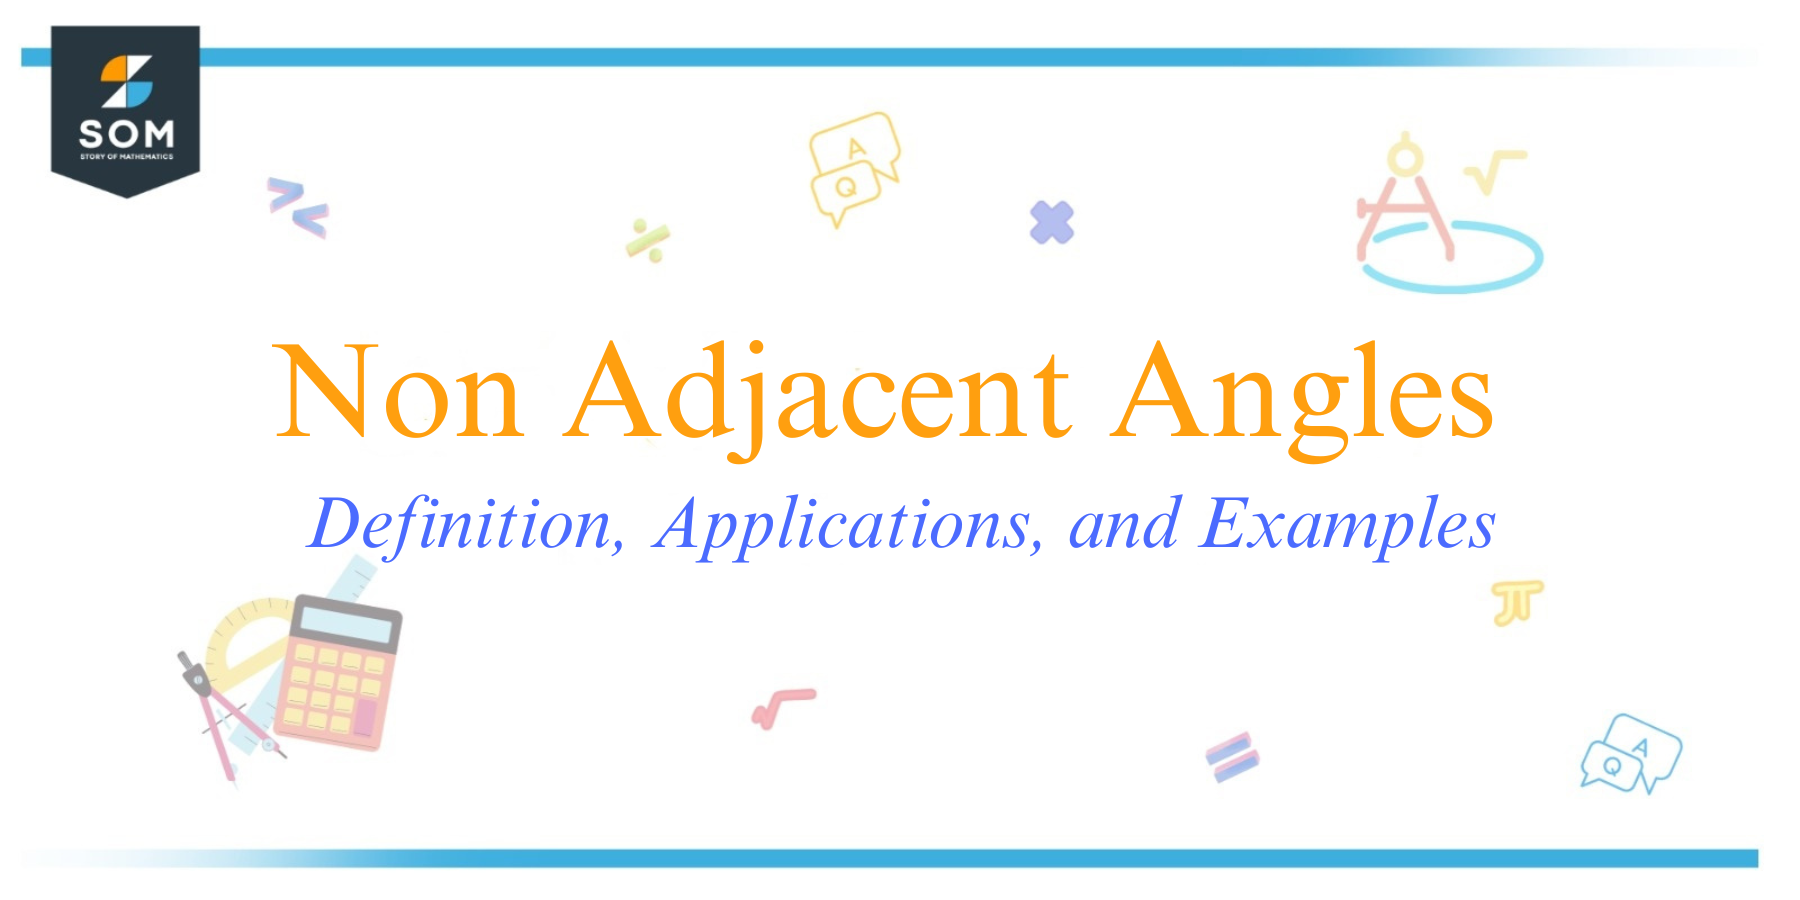 Non Adjacent Angles Definition Applications and